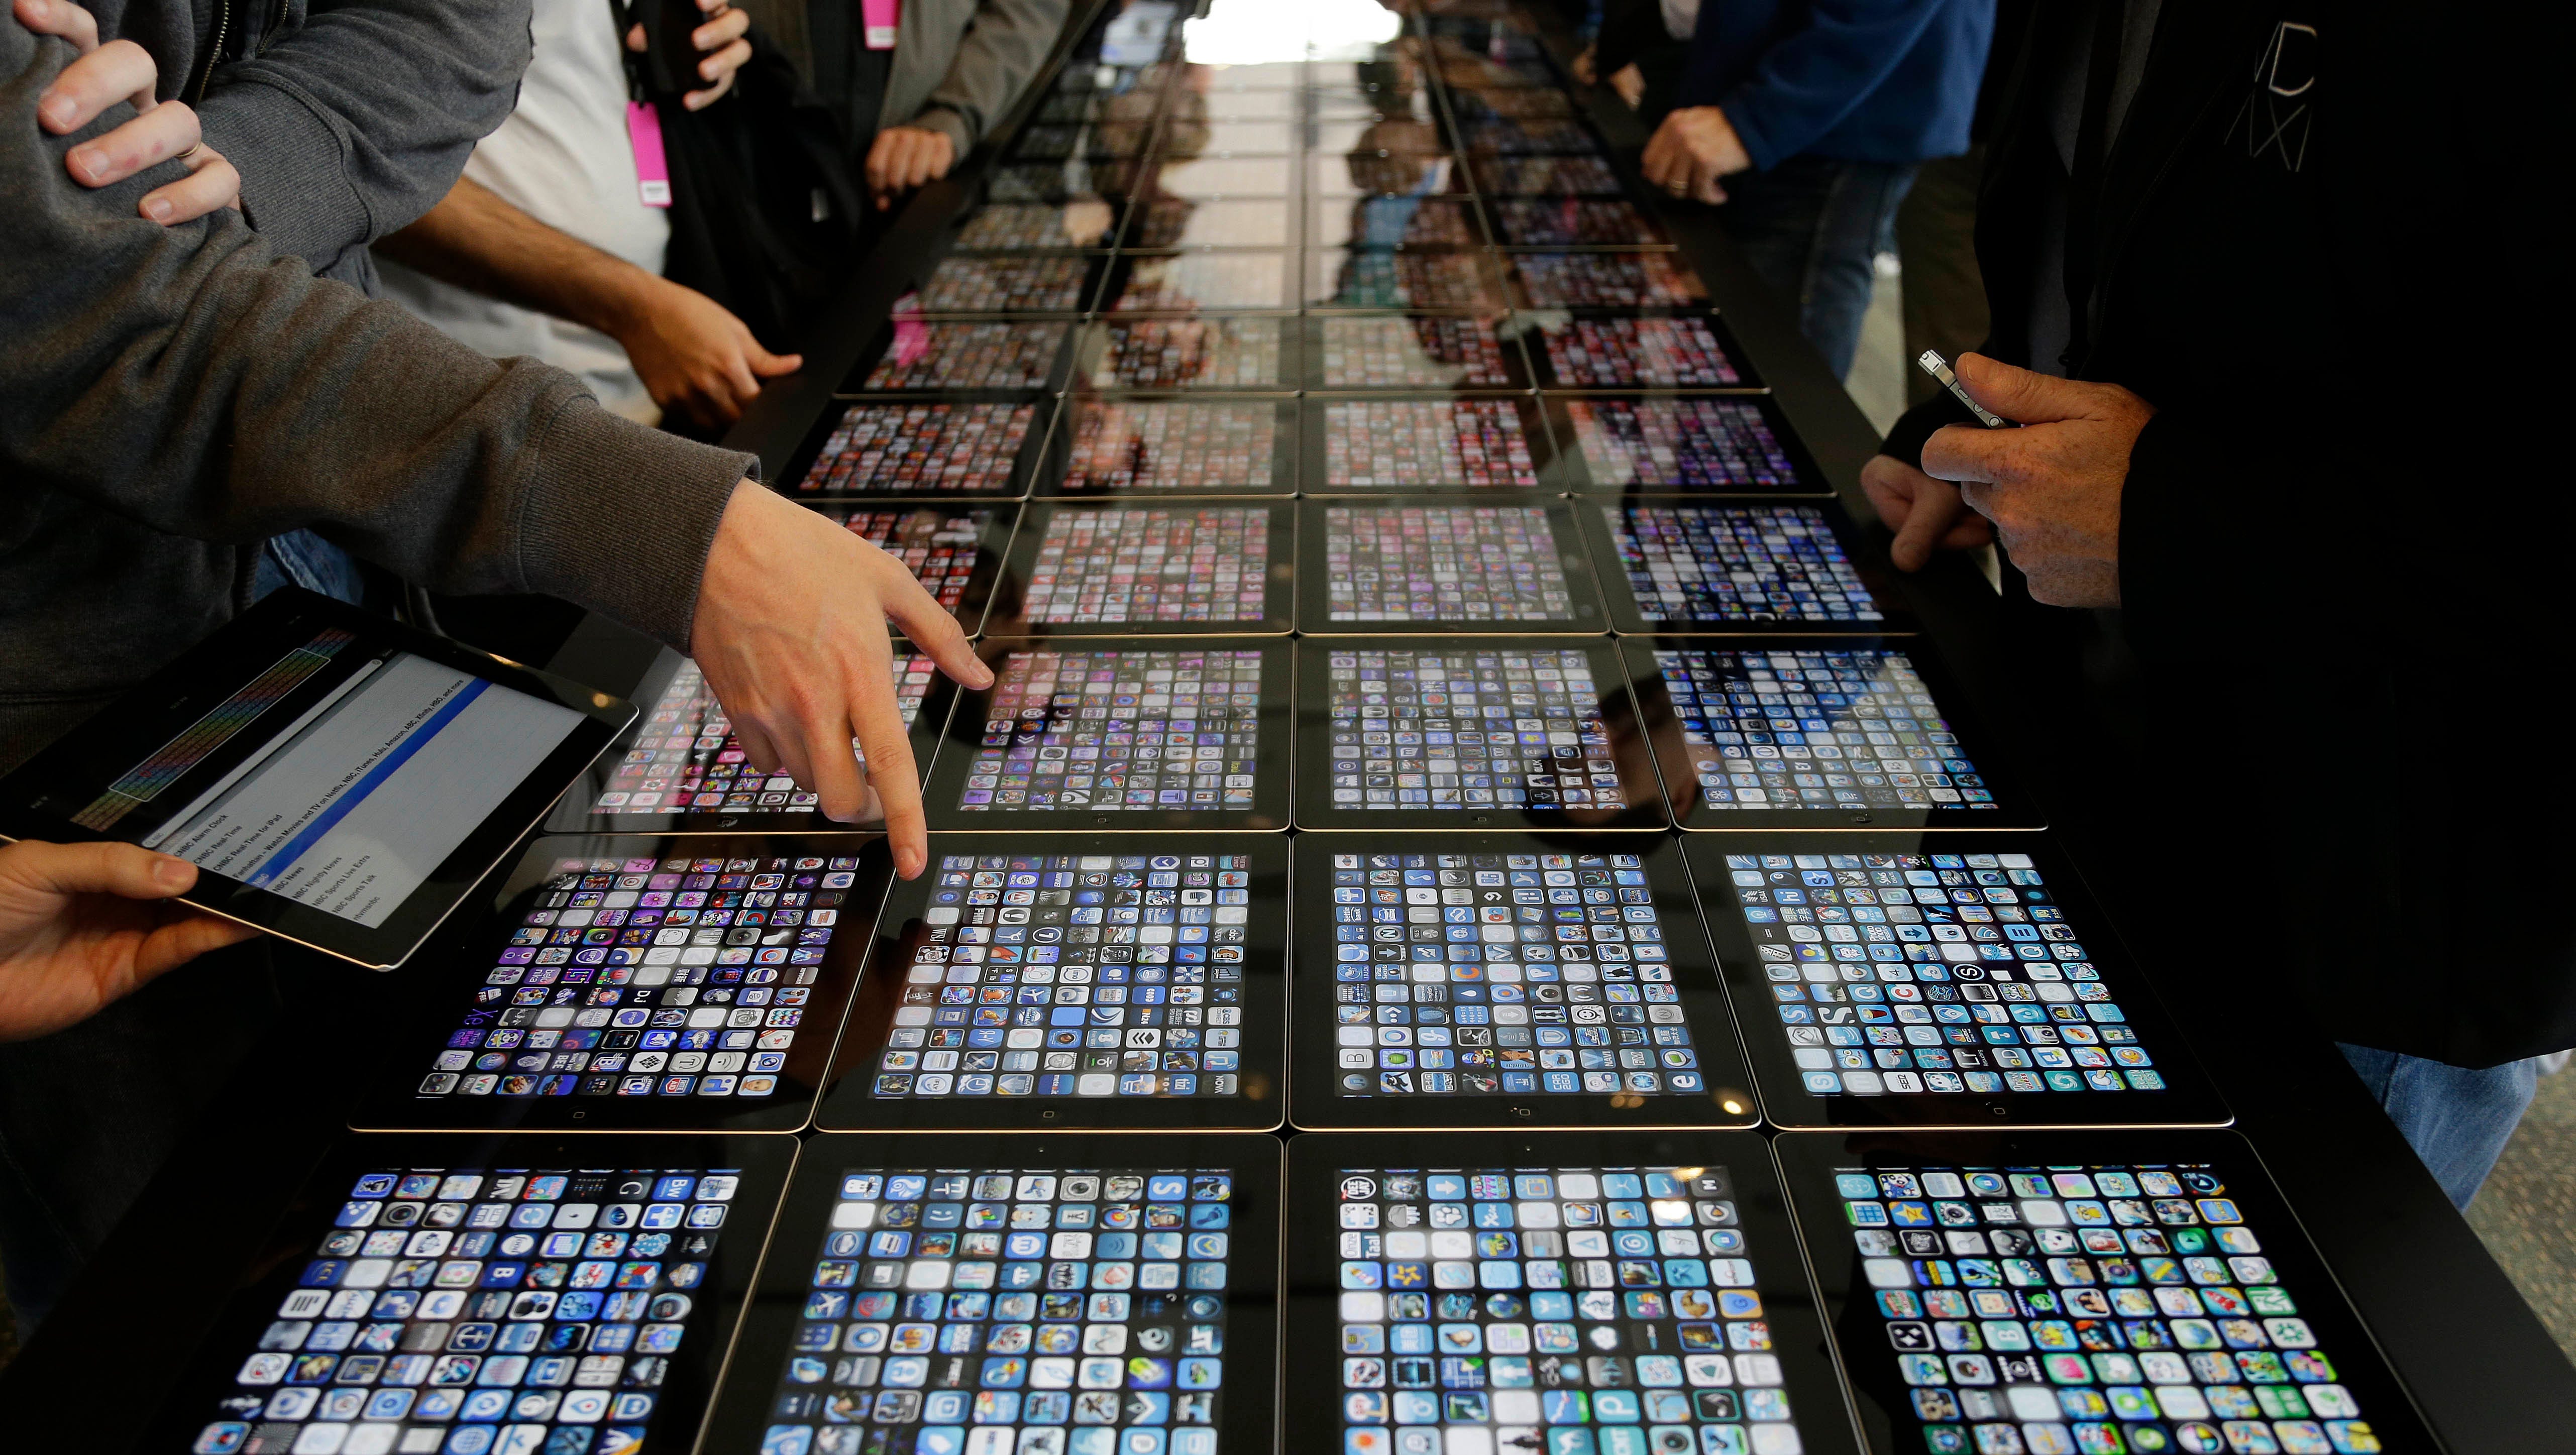 In this June 10, 2013, file photo, developers look over new apps being displayed on iPads at the Apple Worldwide Developers Conference in San Francisco.